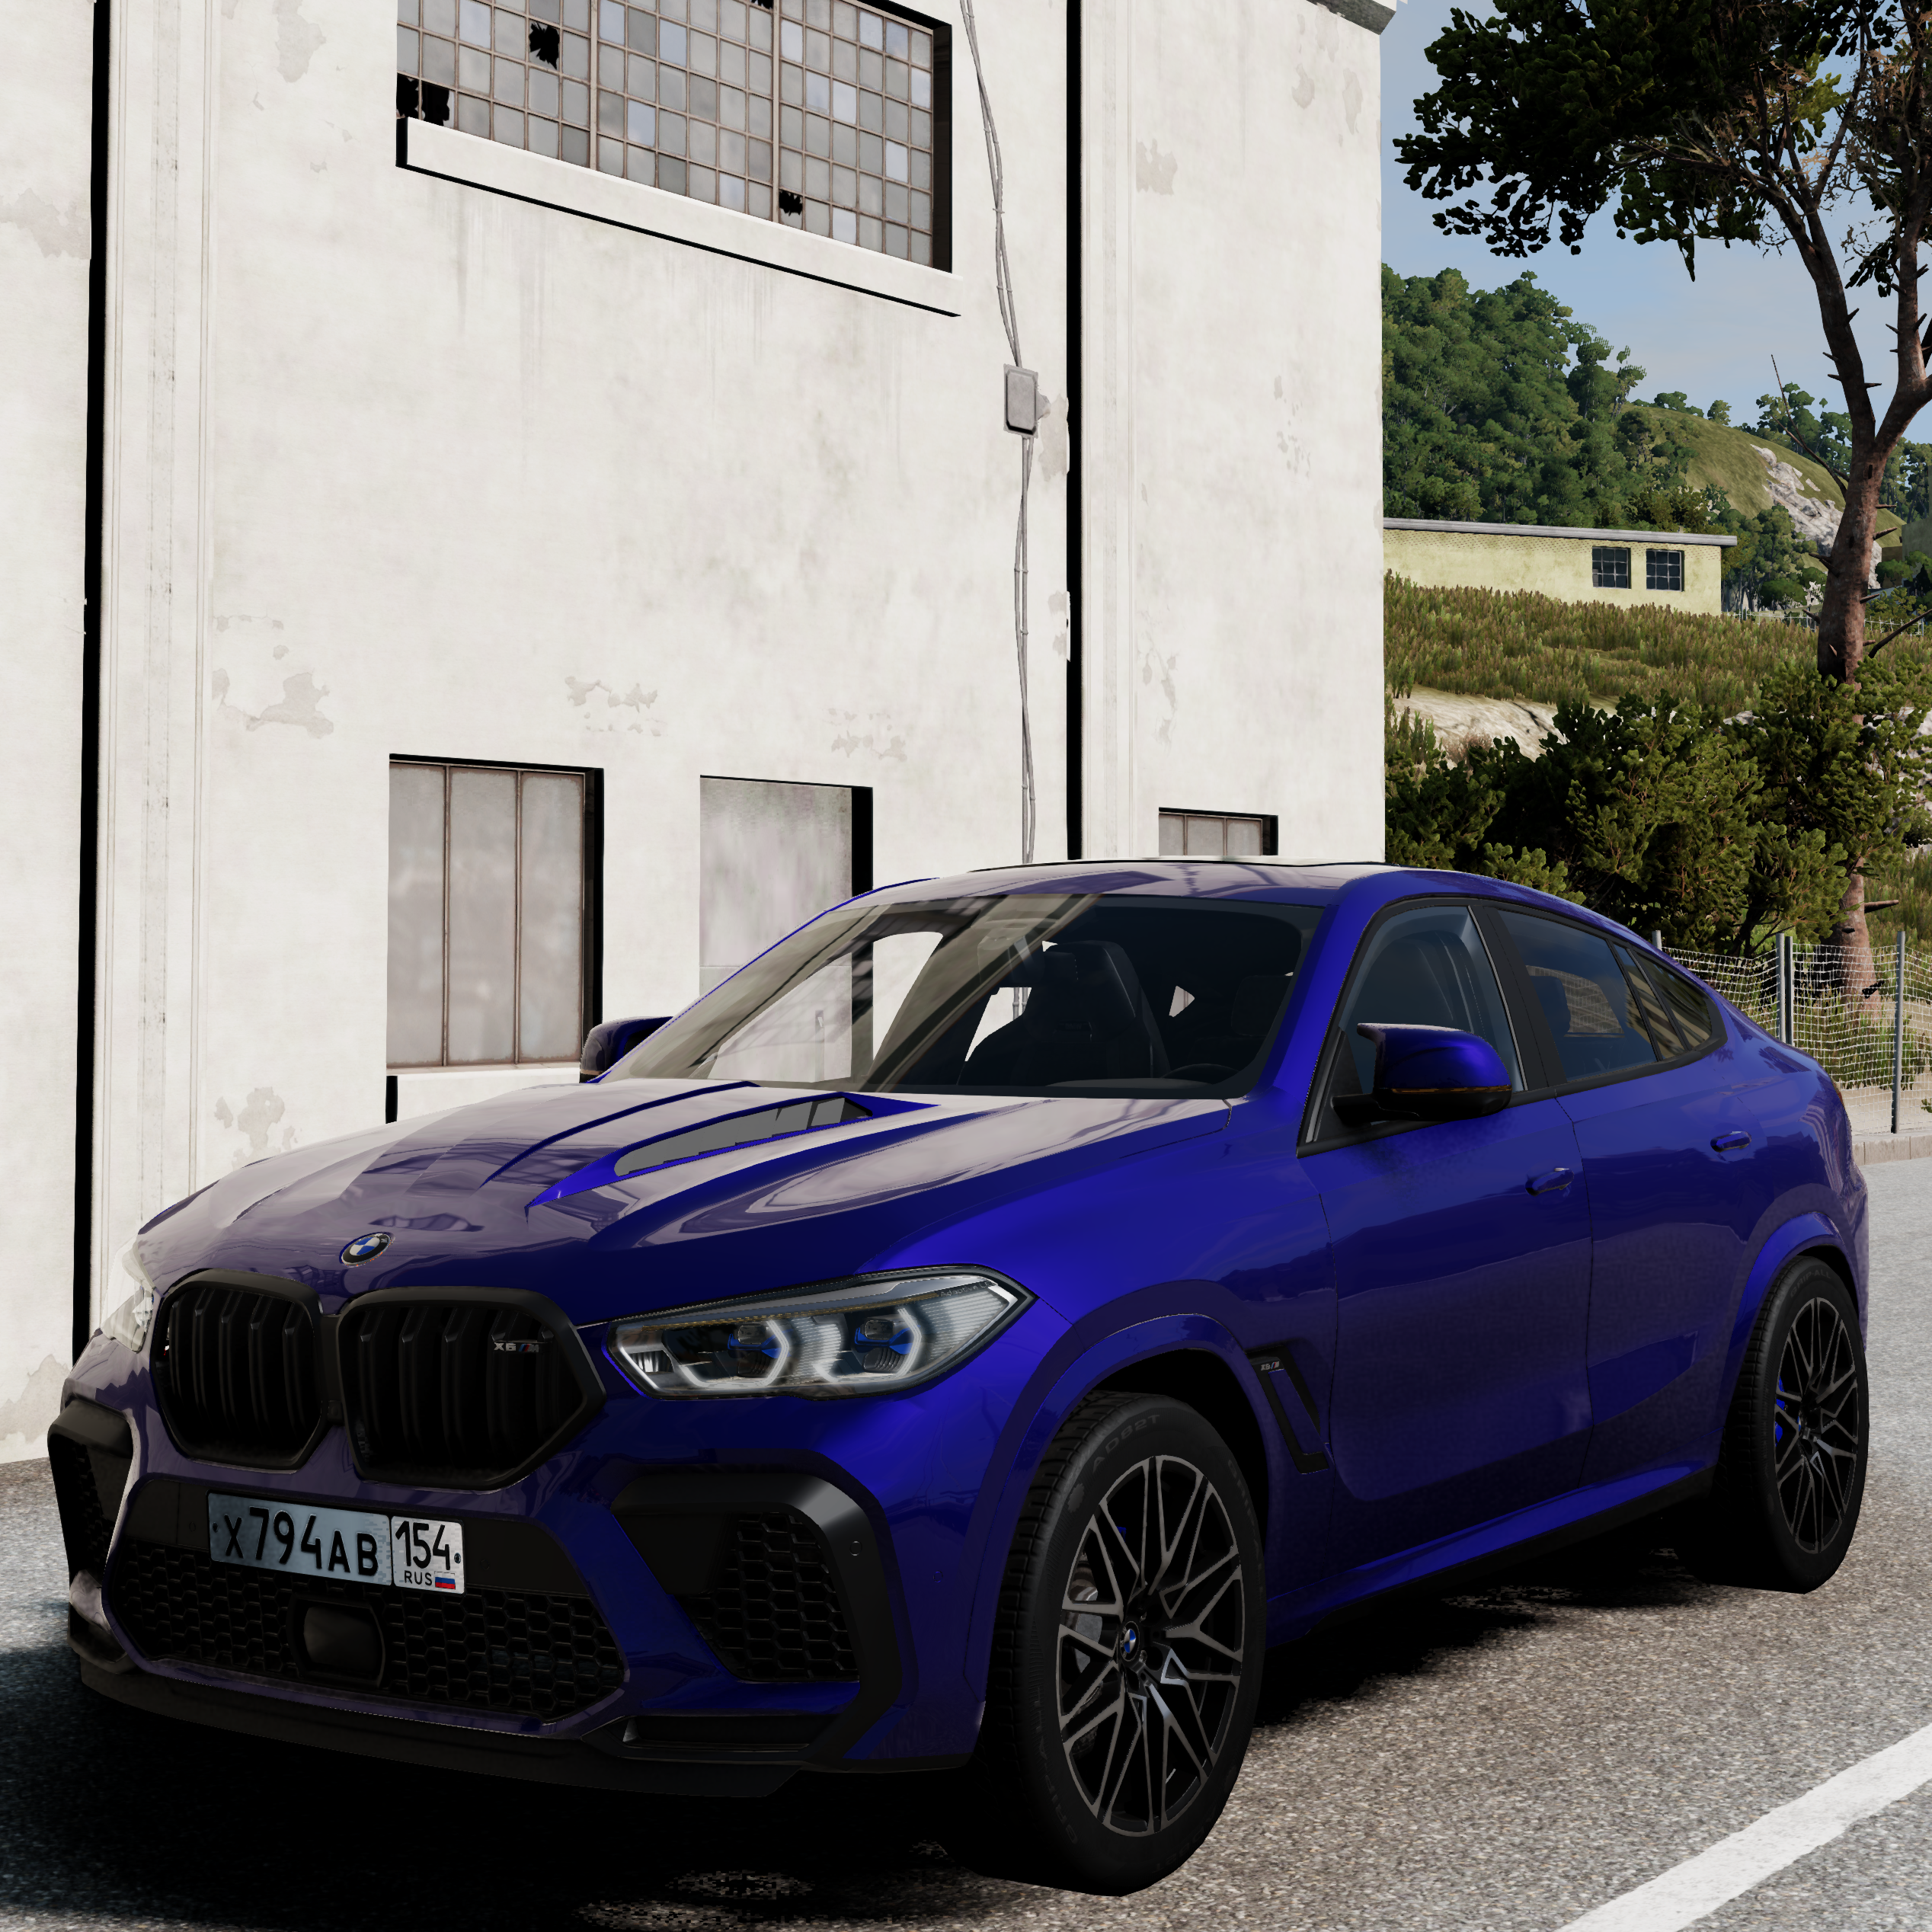 X6 competition. BMW x6 m 2021. БМВ x6m 2021. BMW x6m 2022. BMW x6m Competition 2021.